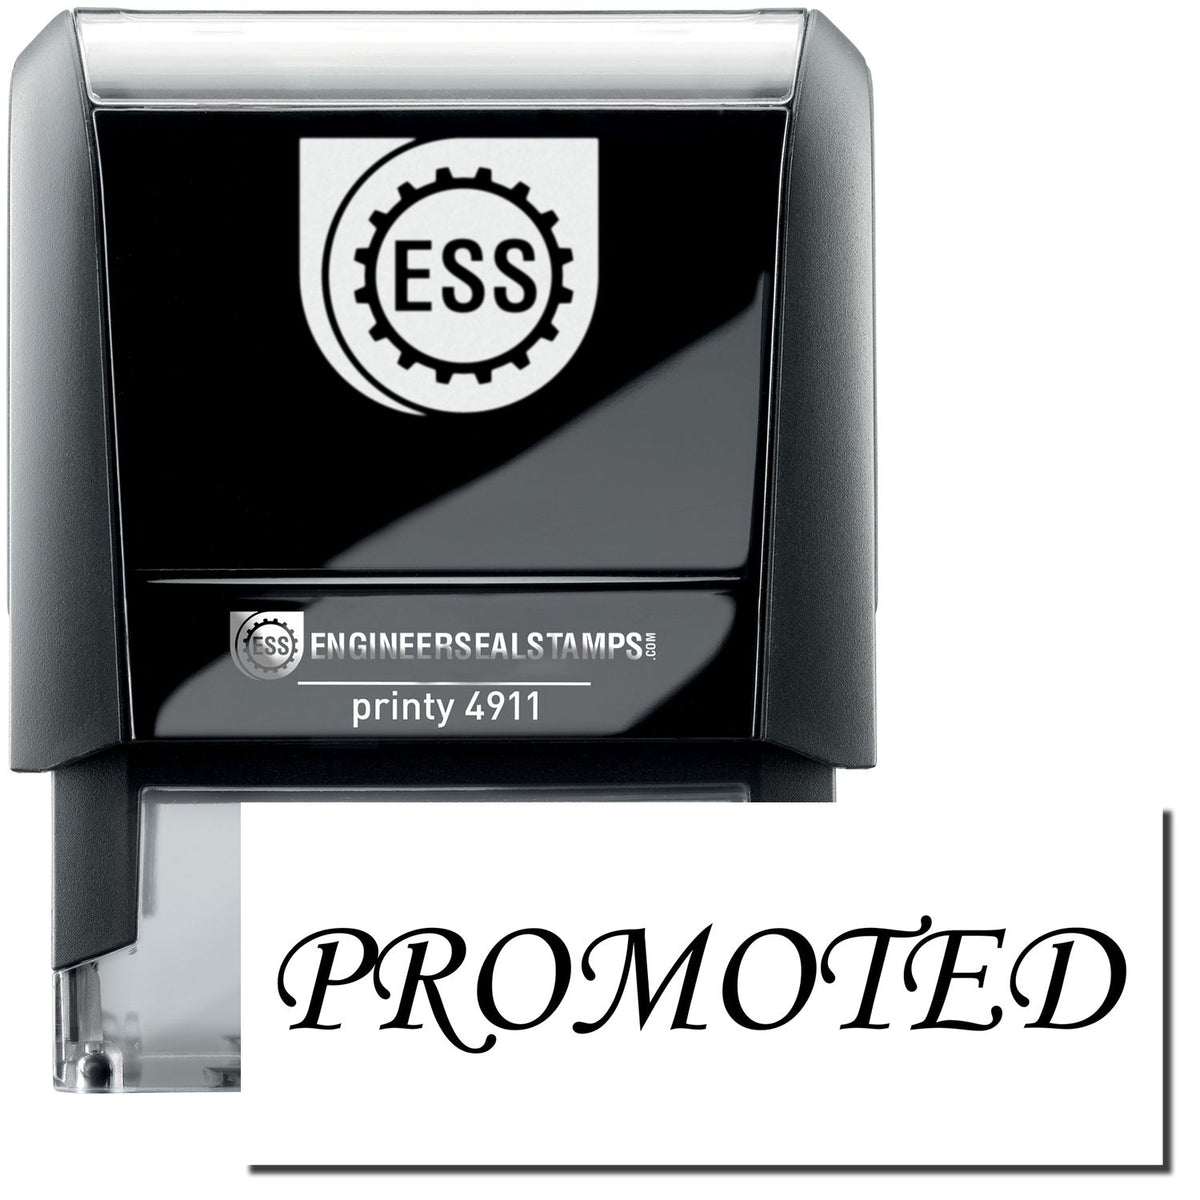 A self-inking stamp with a stamped image showing how the text &quot;PROMOTED&quot; is displayed after stamping.